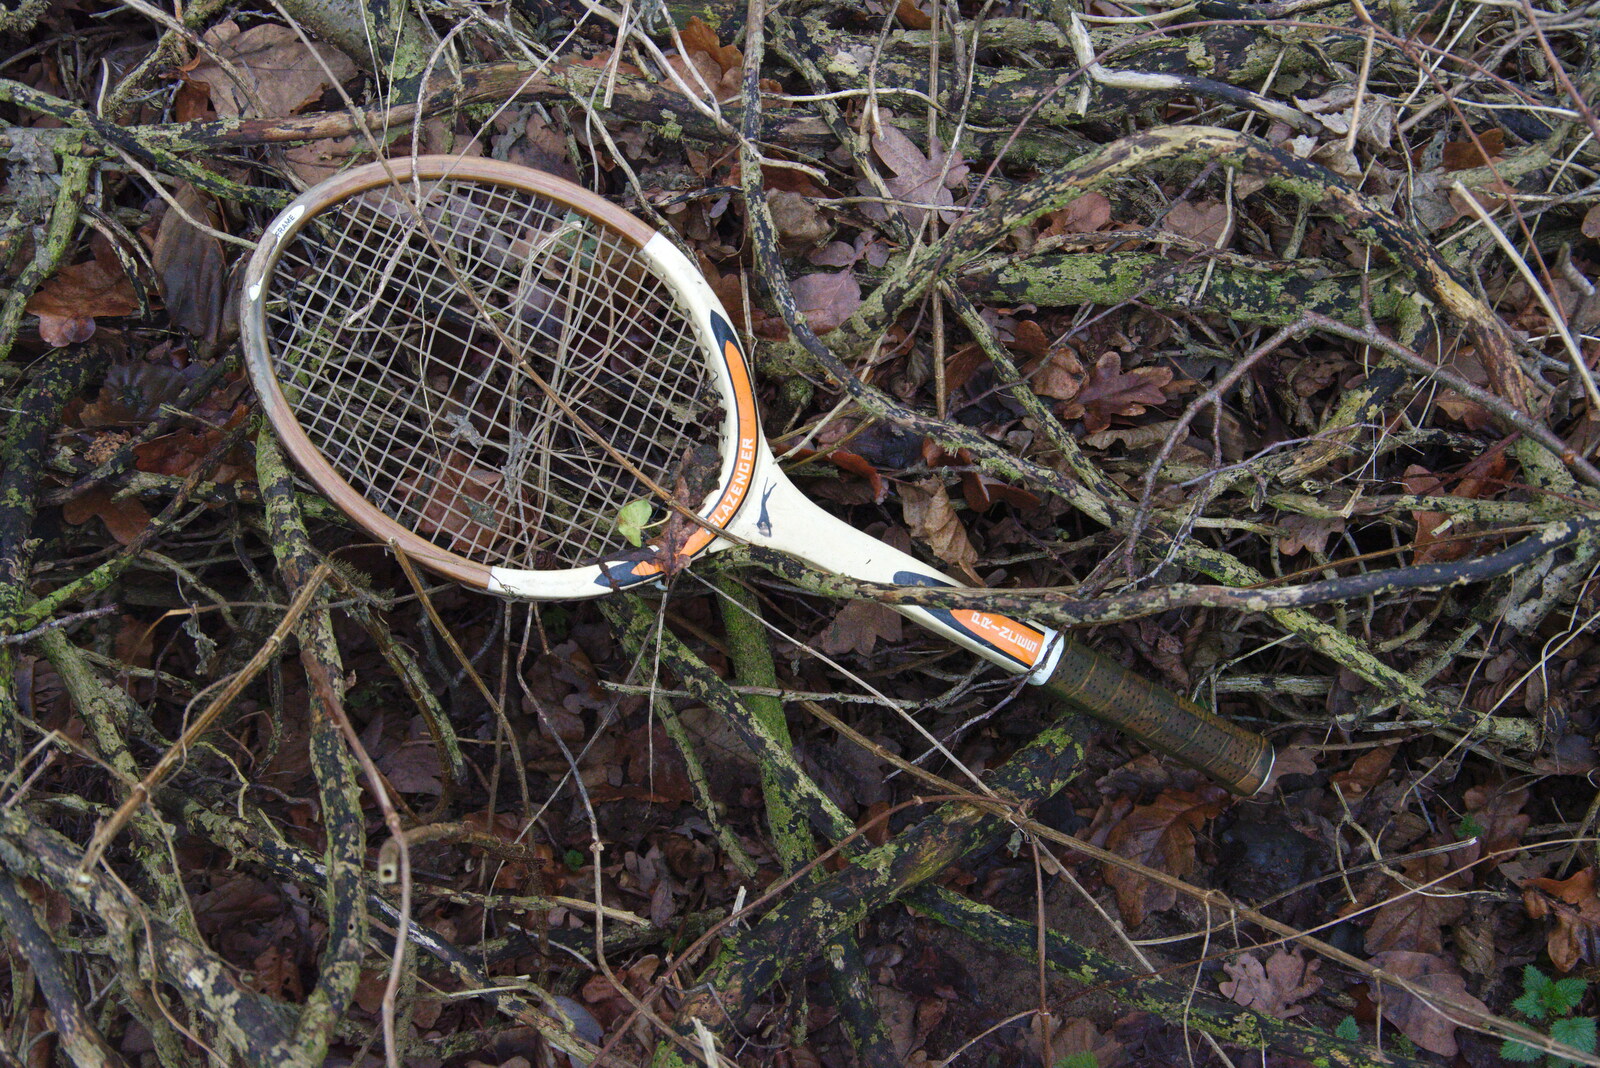 The odd sight of an old wooden tennis racquet from New Year's Day on the Ling, Wortham, Suffolk - 1st January 2020